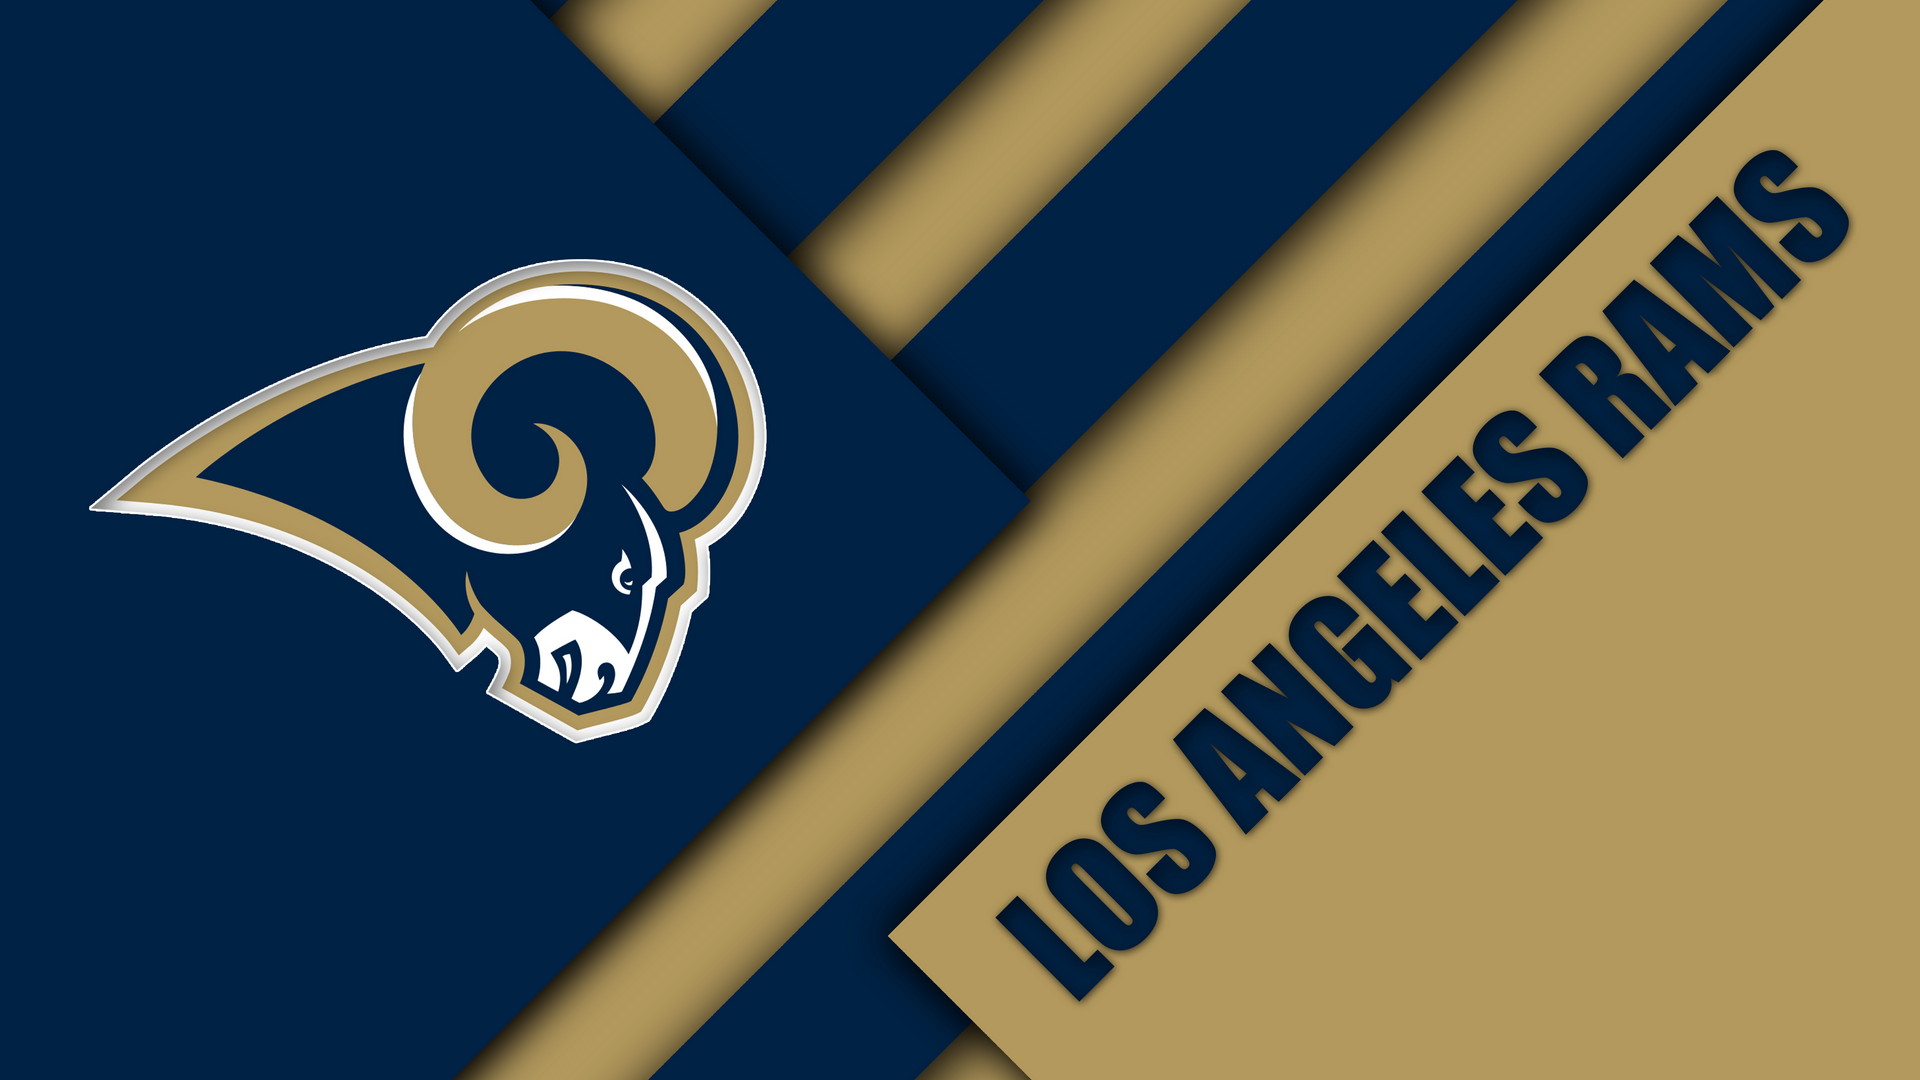 LA Rams HD Wallpapers With high-resolution 1920X1080 pixel. You can use this wallpaper for your Mac or Windows Desktop Background, iPhone, Android or Tablet and another Smartphone device